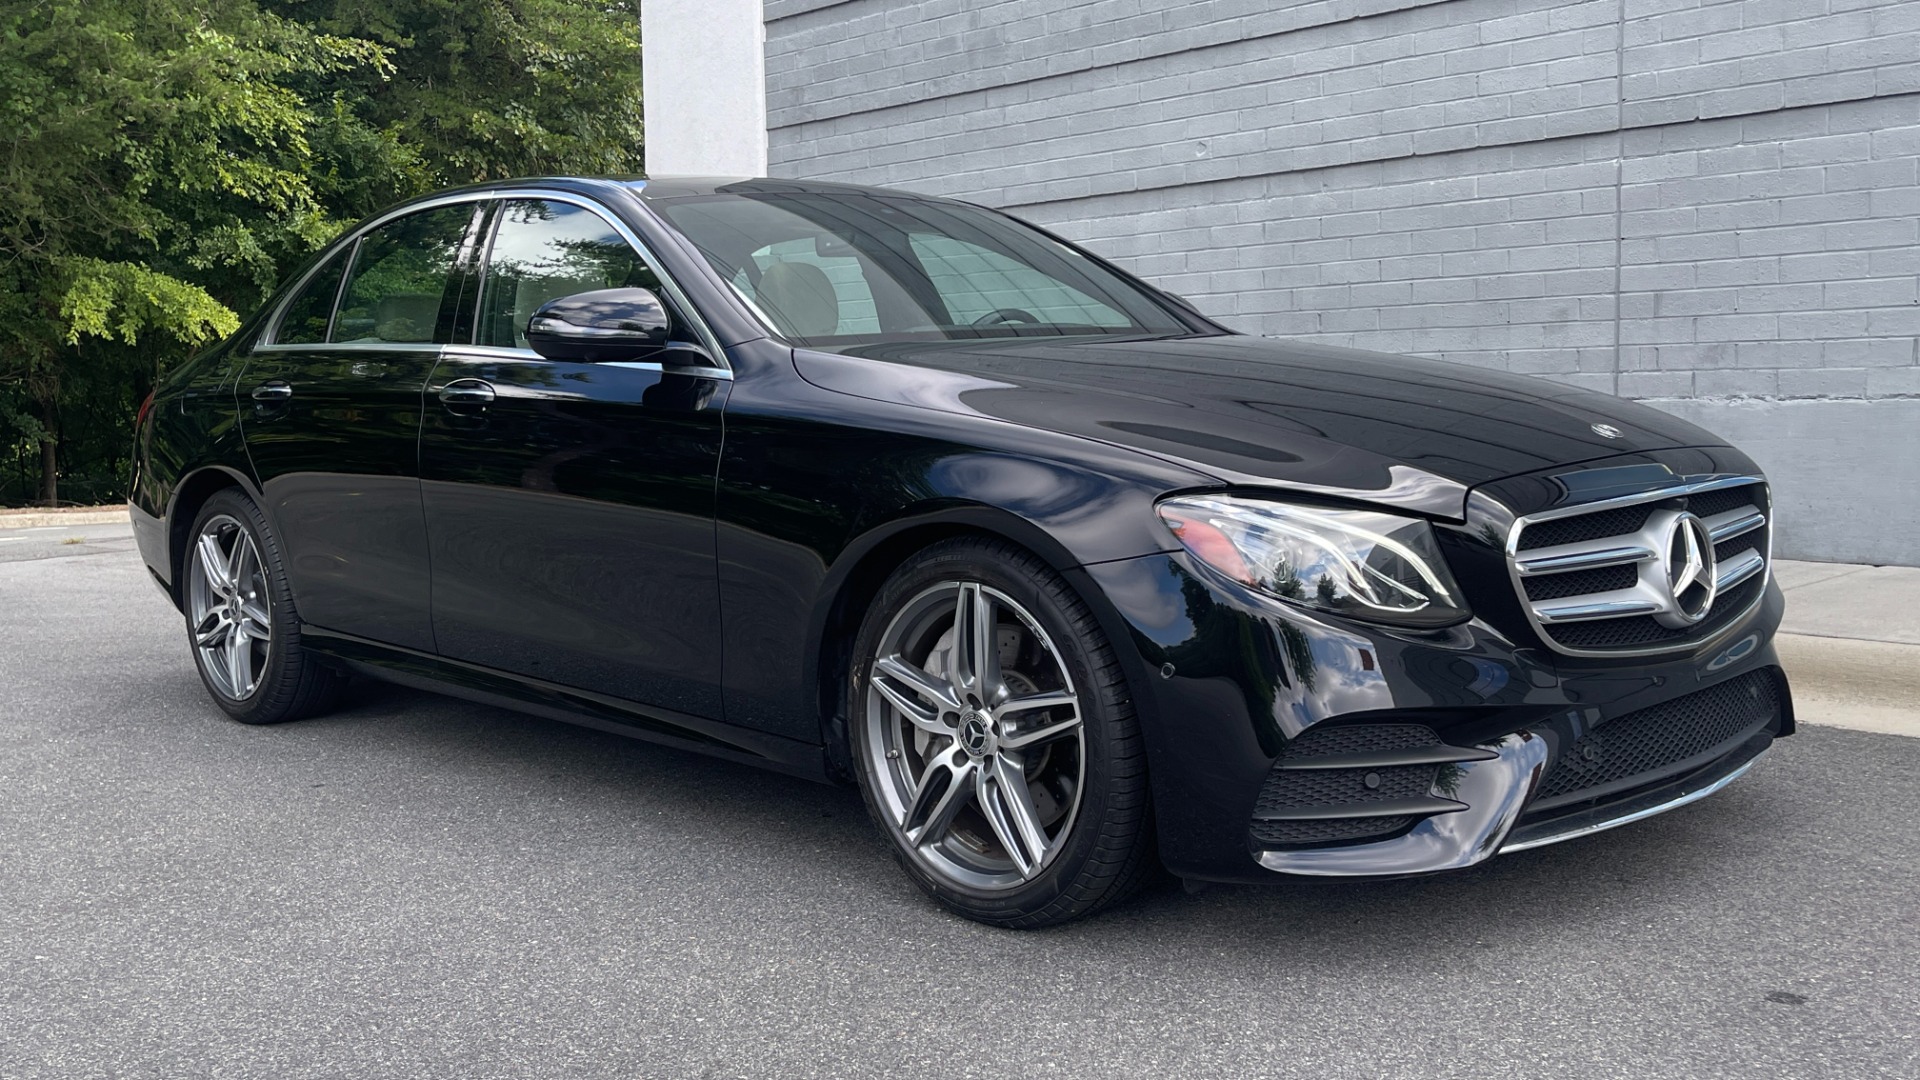 Used 2020 Mercedes-Benz E-Class E 350 / 4MATIC / AMG LINE / BURMESTER SOUND / PANORAMIC ROOF for sale $52,999 at Formula Imports in Charlotte NC 28227 8